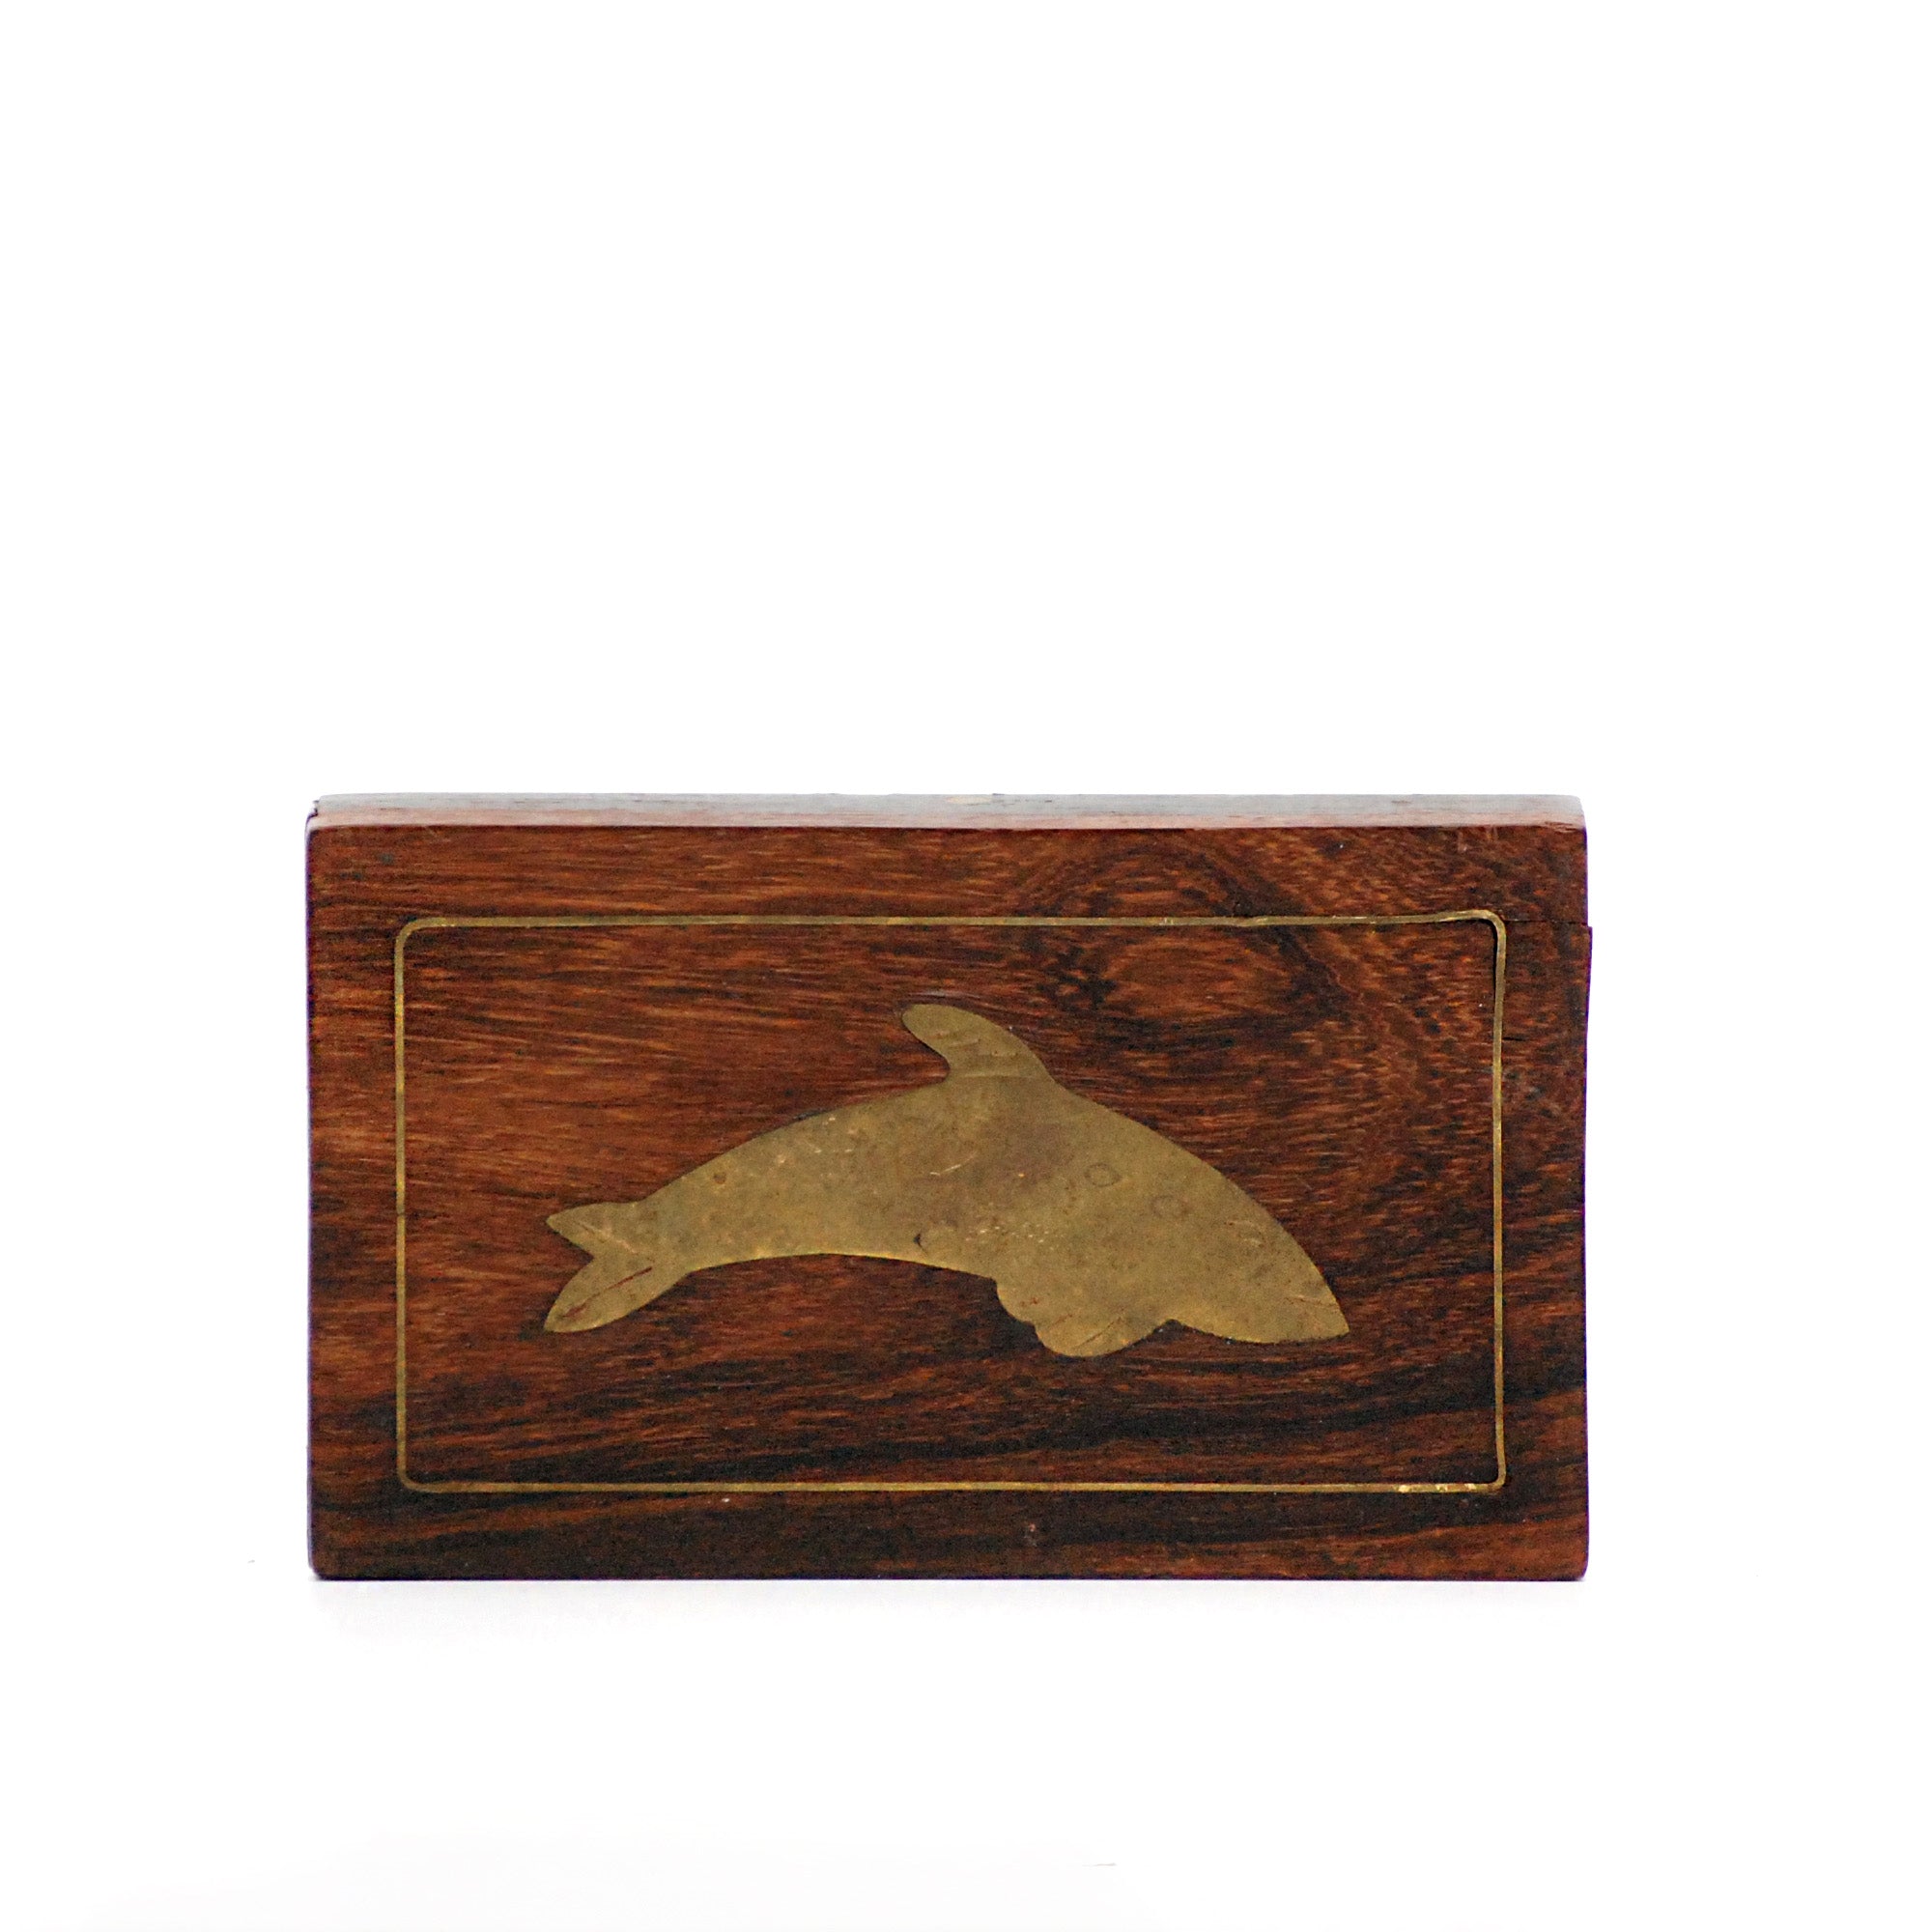 Decorative Wooden Box with Dolphin